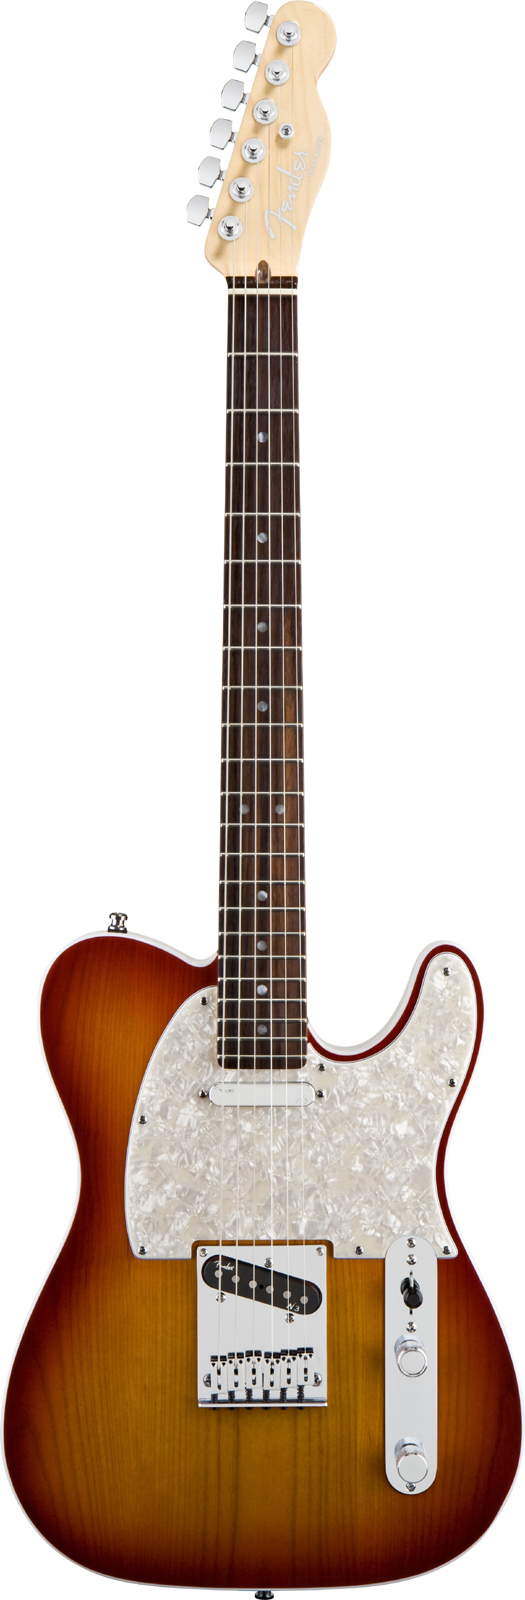 American Deluxe Telecaster